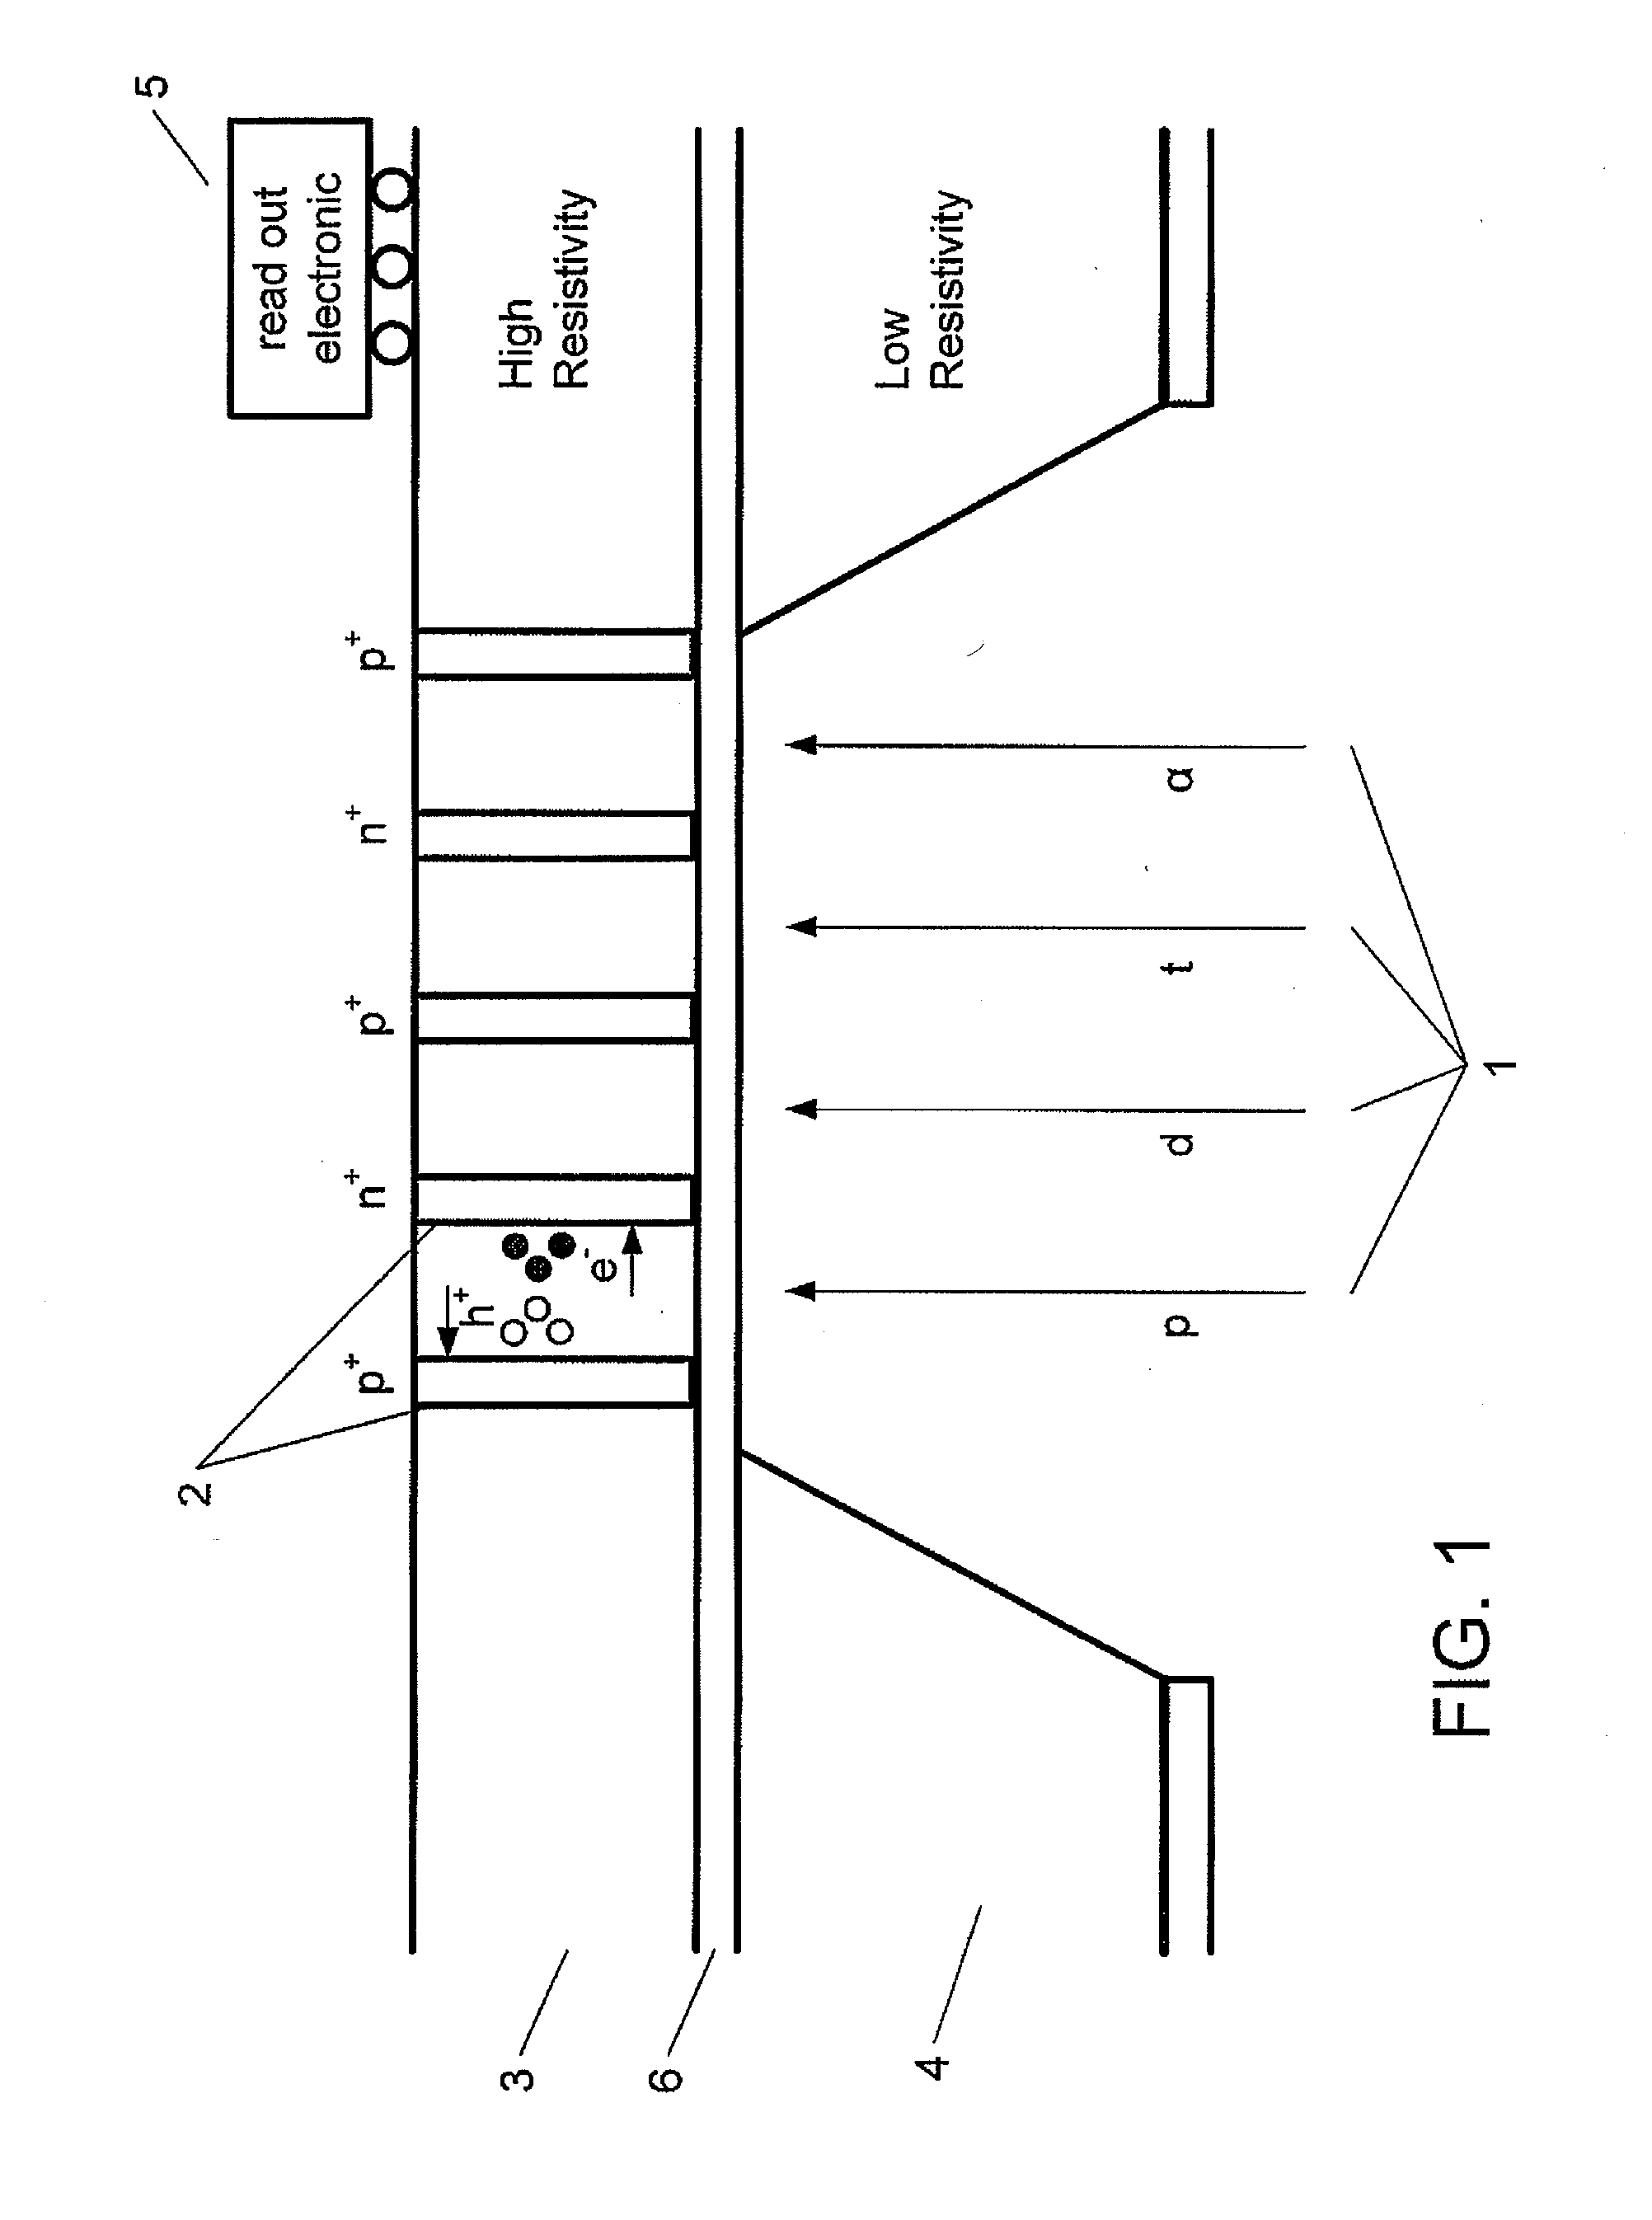 Radiation detector, method of manufacturing a radiation detector and use of the detector for measuring radiation